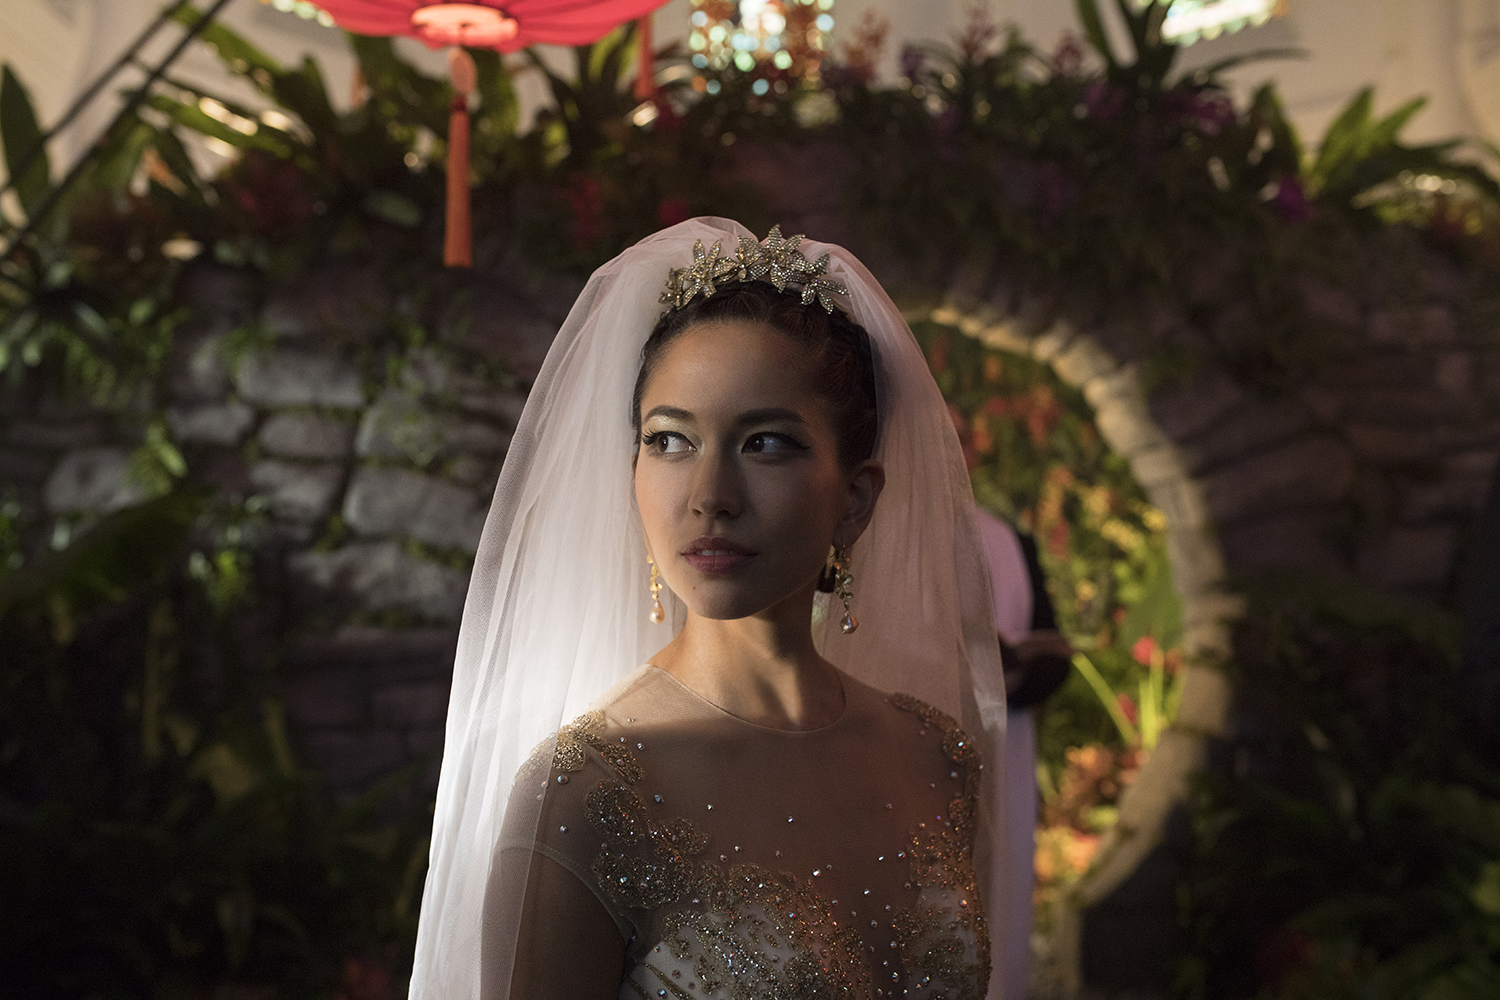 Inside story of the jewellery Crazy Rich Asians characters wore